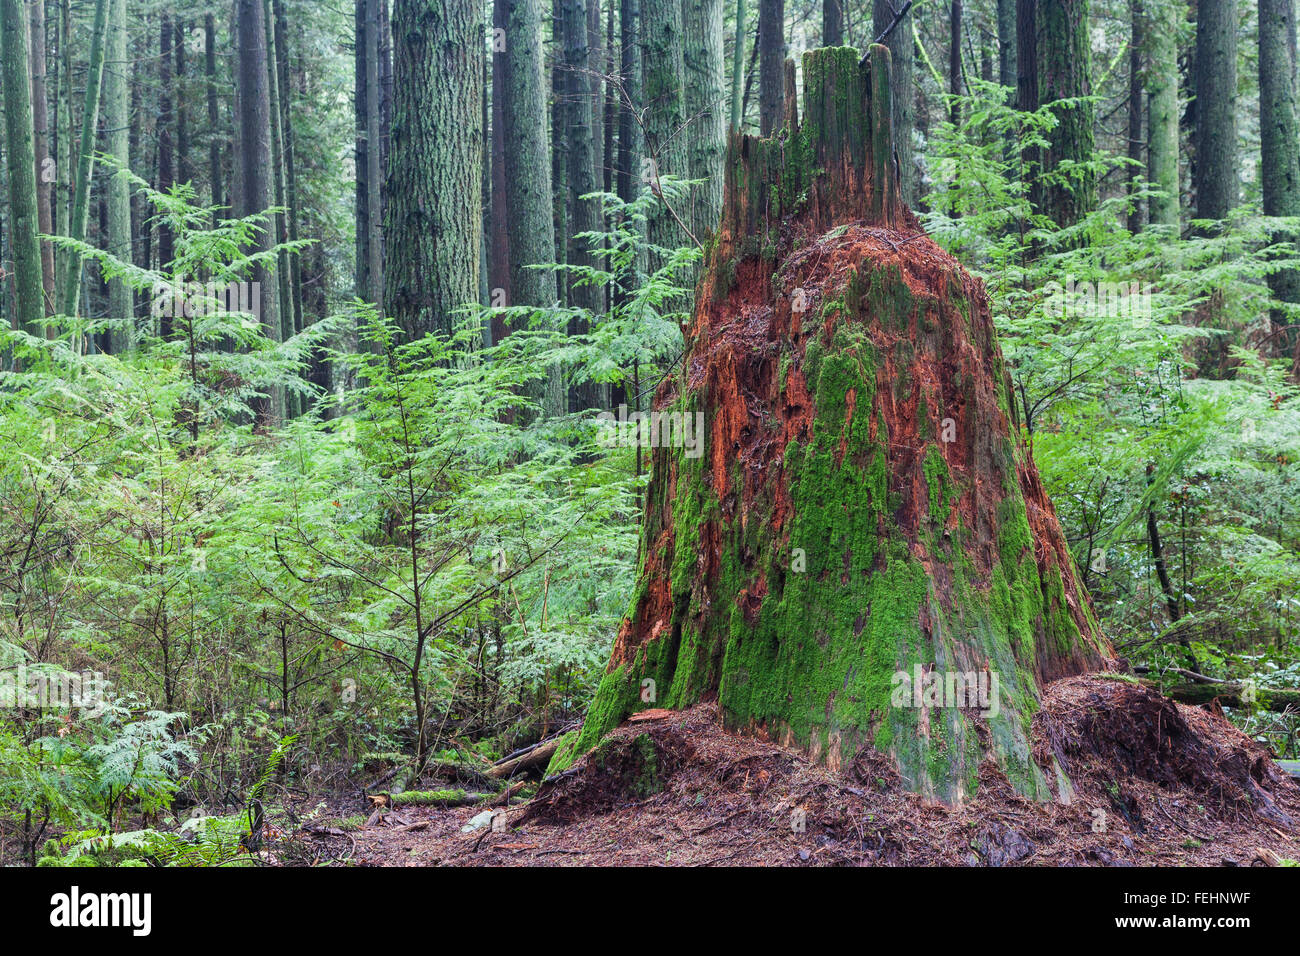 Decomposing fir tree stump in a temperate rain forest Stock Photo